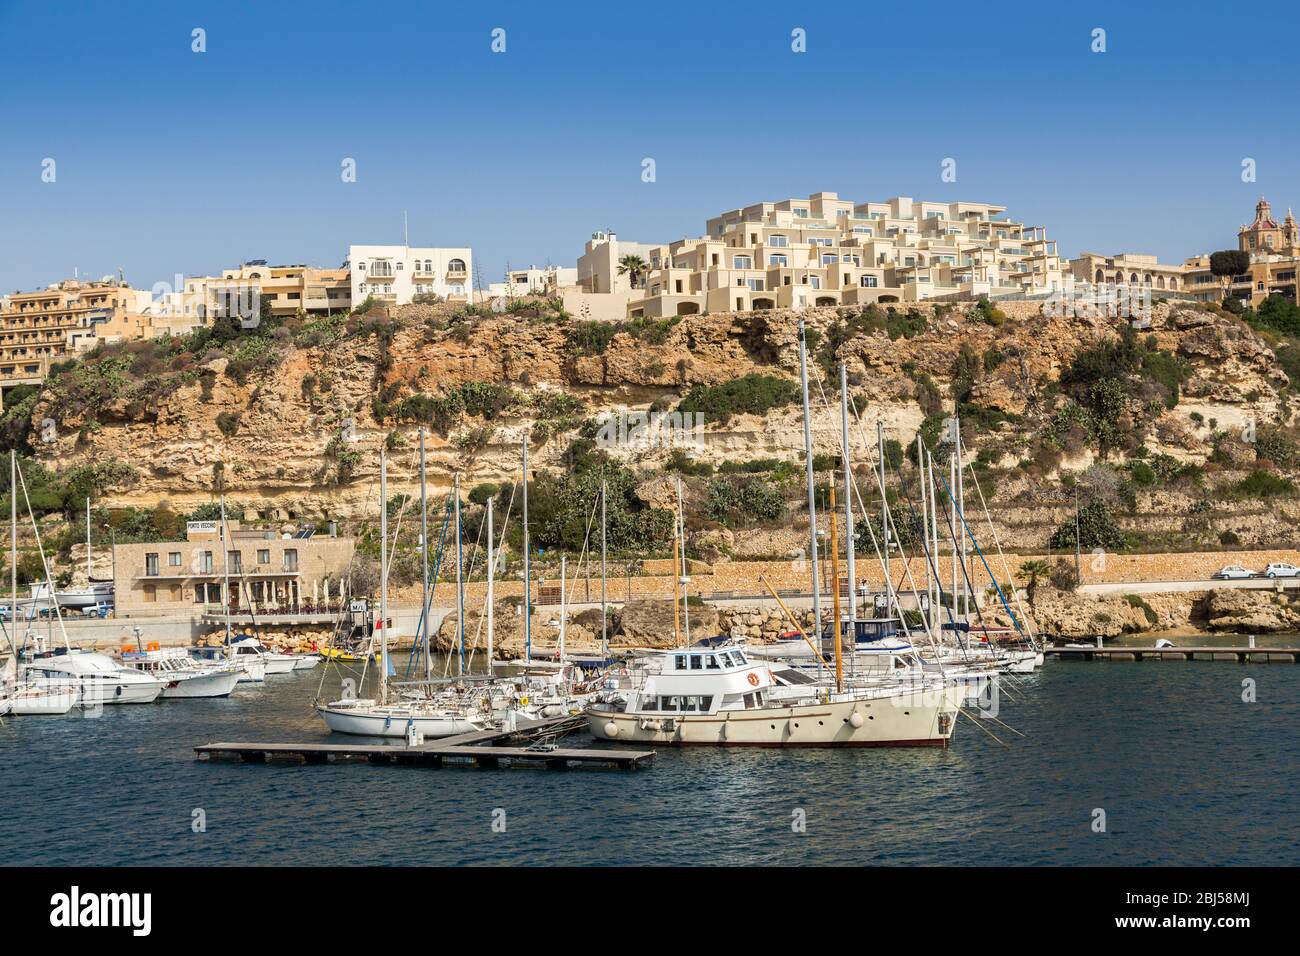 Yachts moored in harbour, Mgarr, Gozo Stock Photo